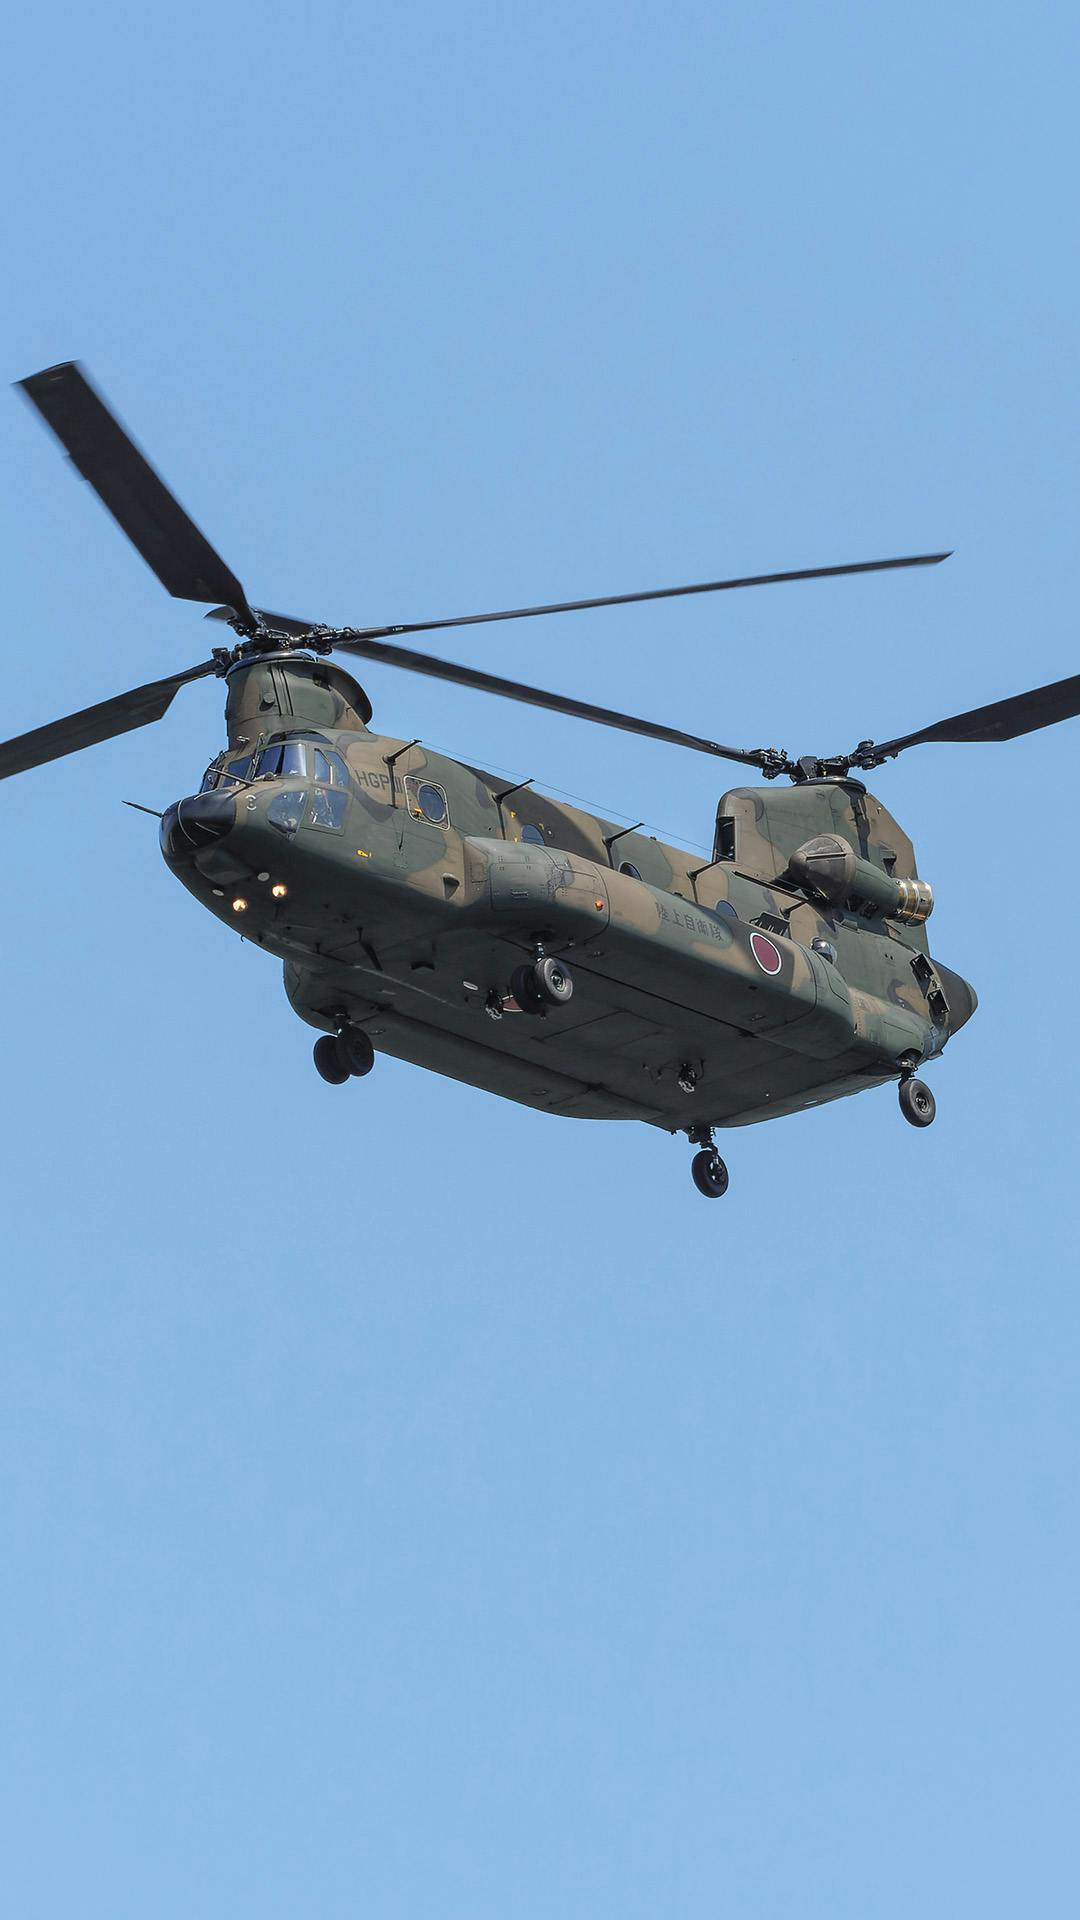 Ch 47 flying in air